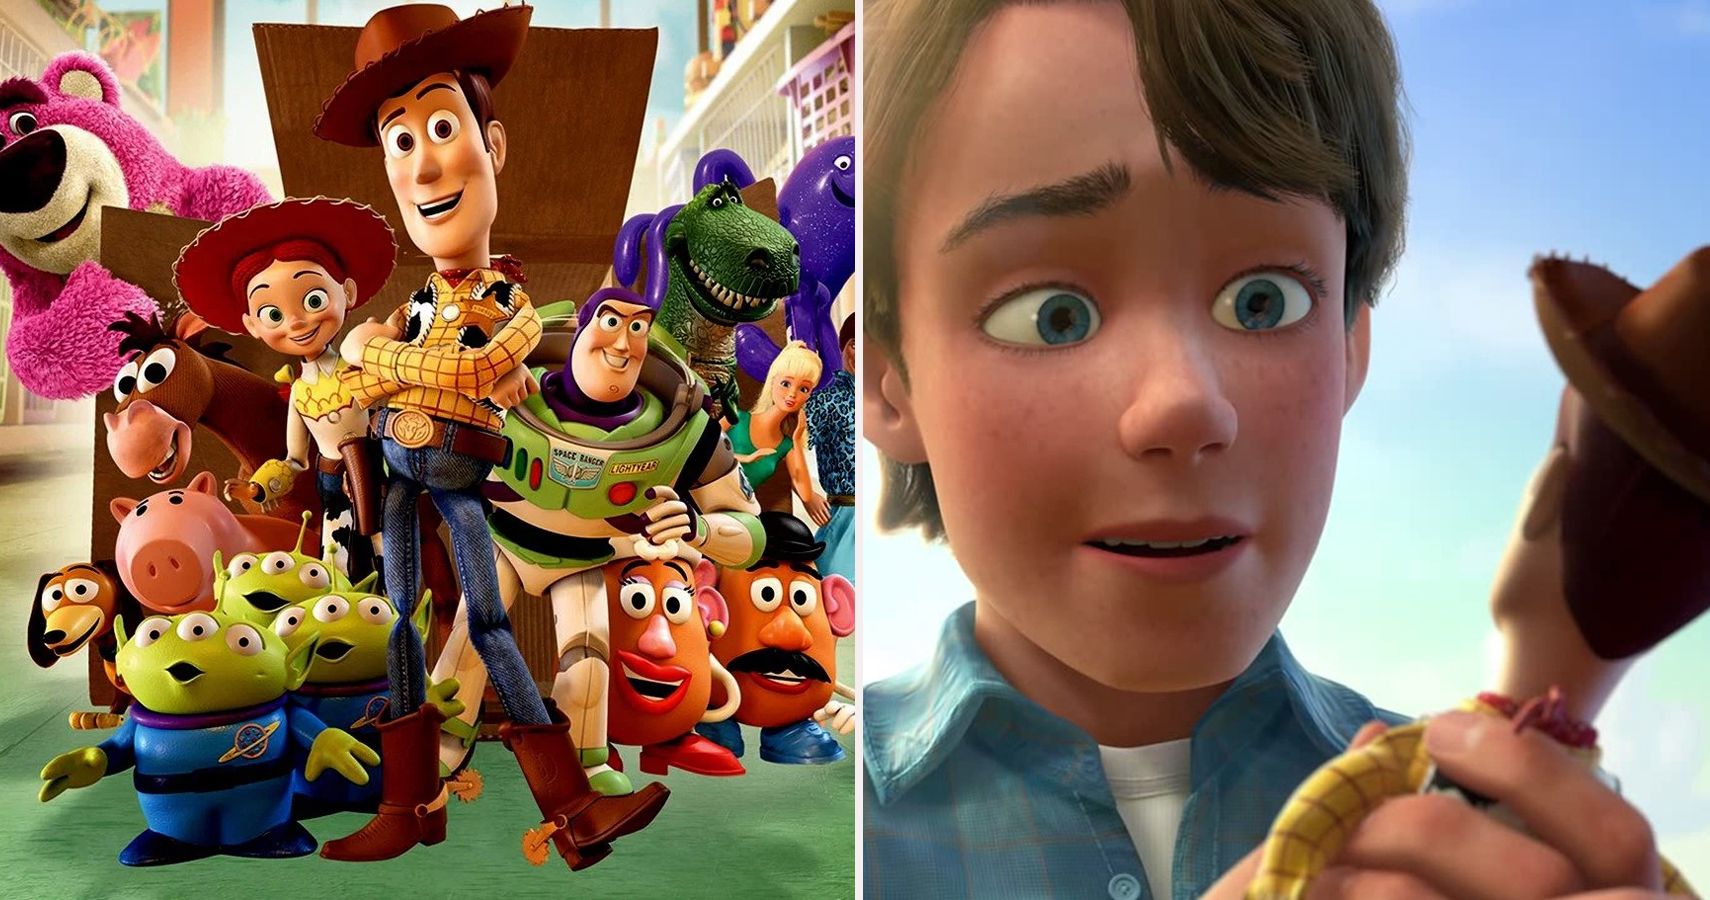 Despicable Me' vs. 'Toy Story': Which Animated Series Is More Popular?